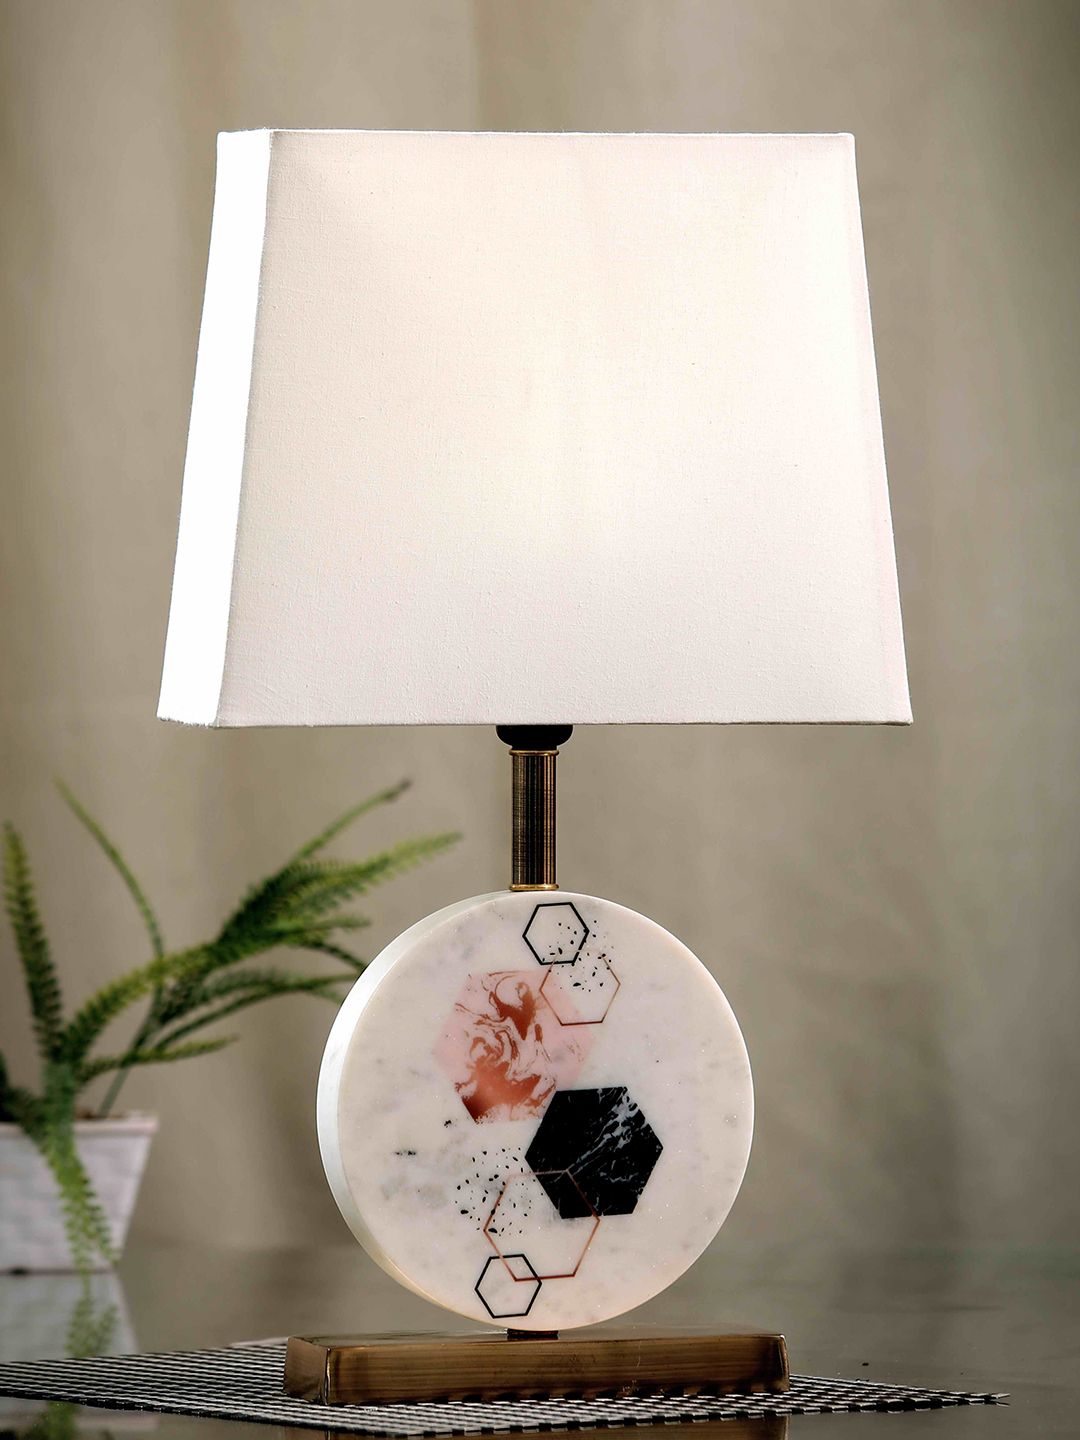 POSH-N-PLUSH White Marble Bedside Standard Lamp Price in India